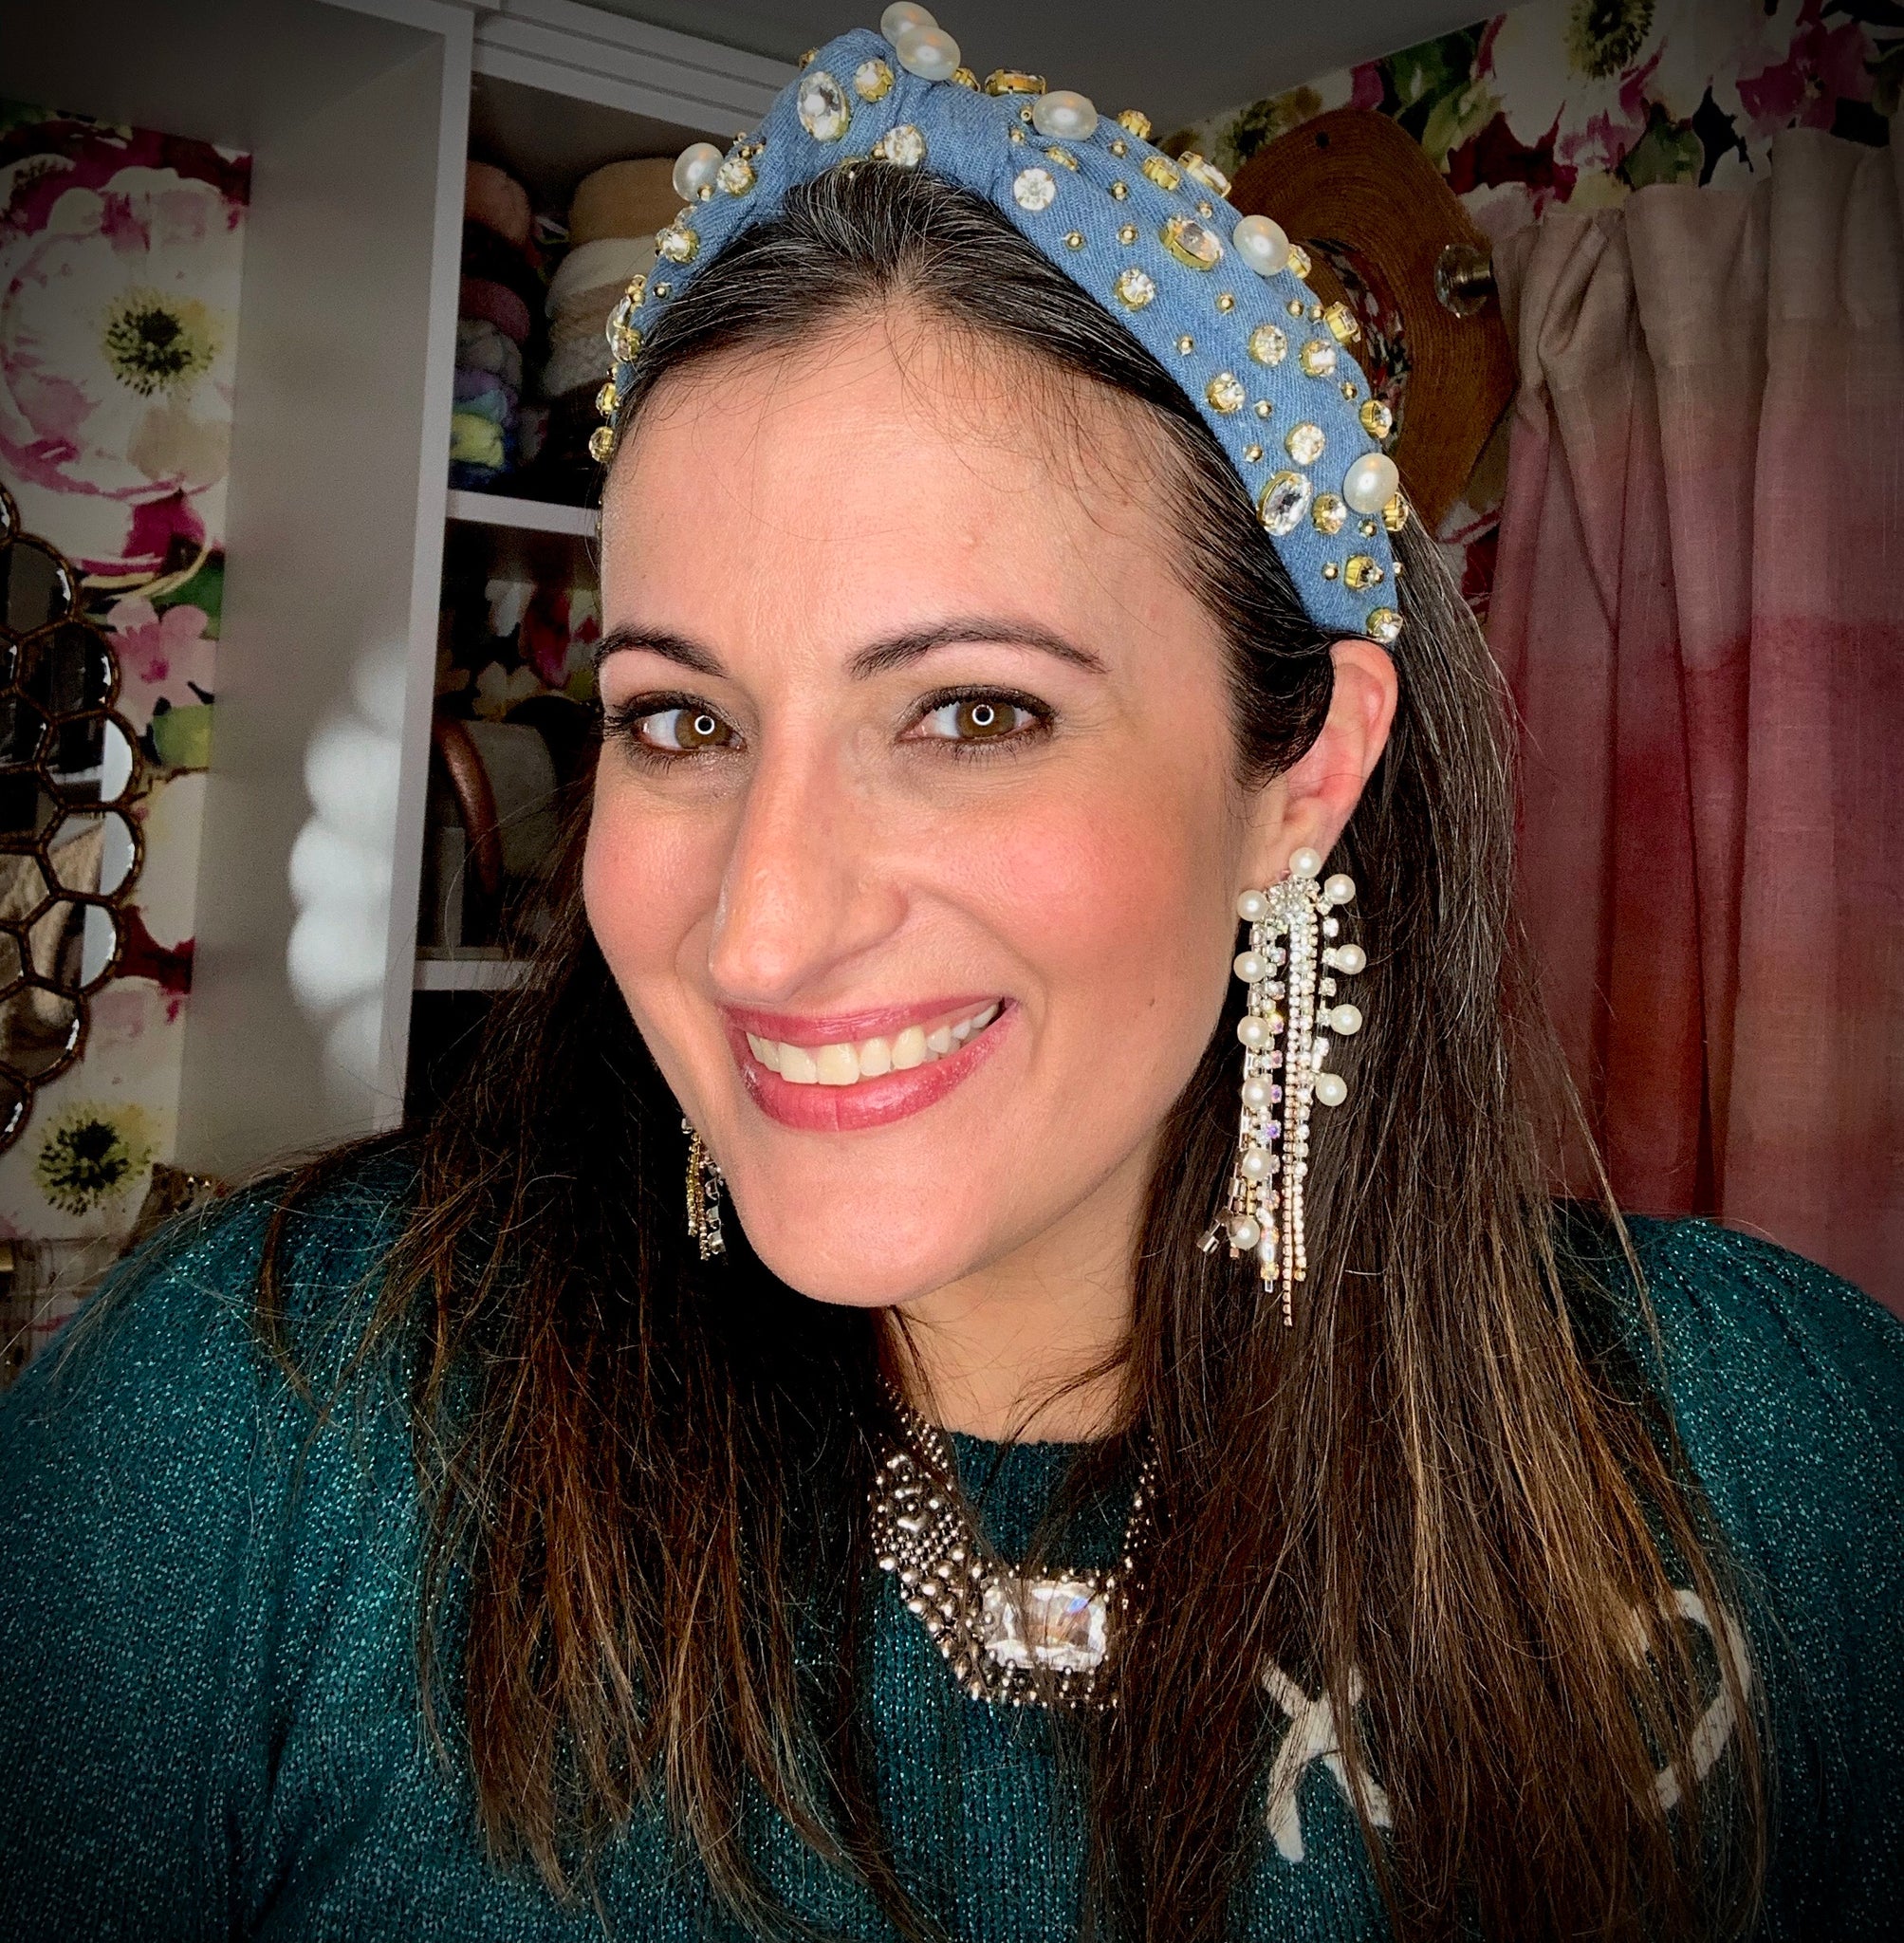 [Handmade Hair clips, Headbands and Statements Earrings] - [Hair Candy By Han]